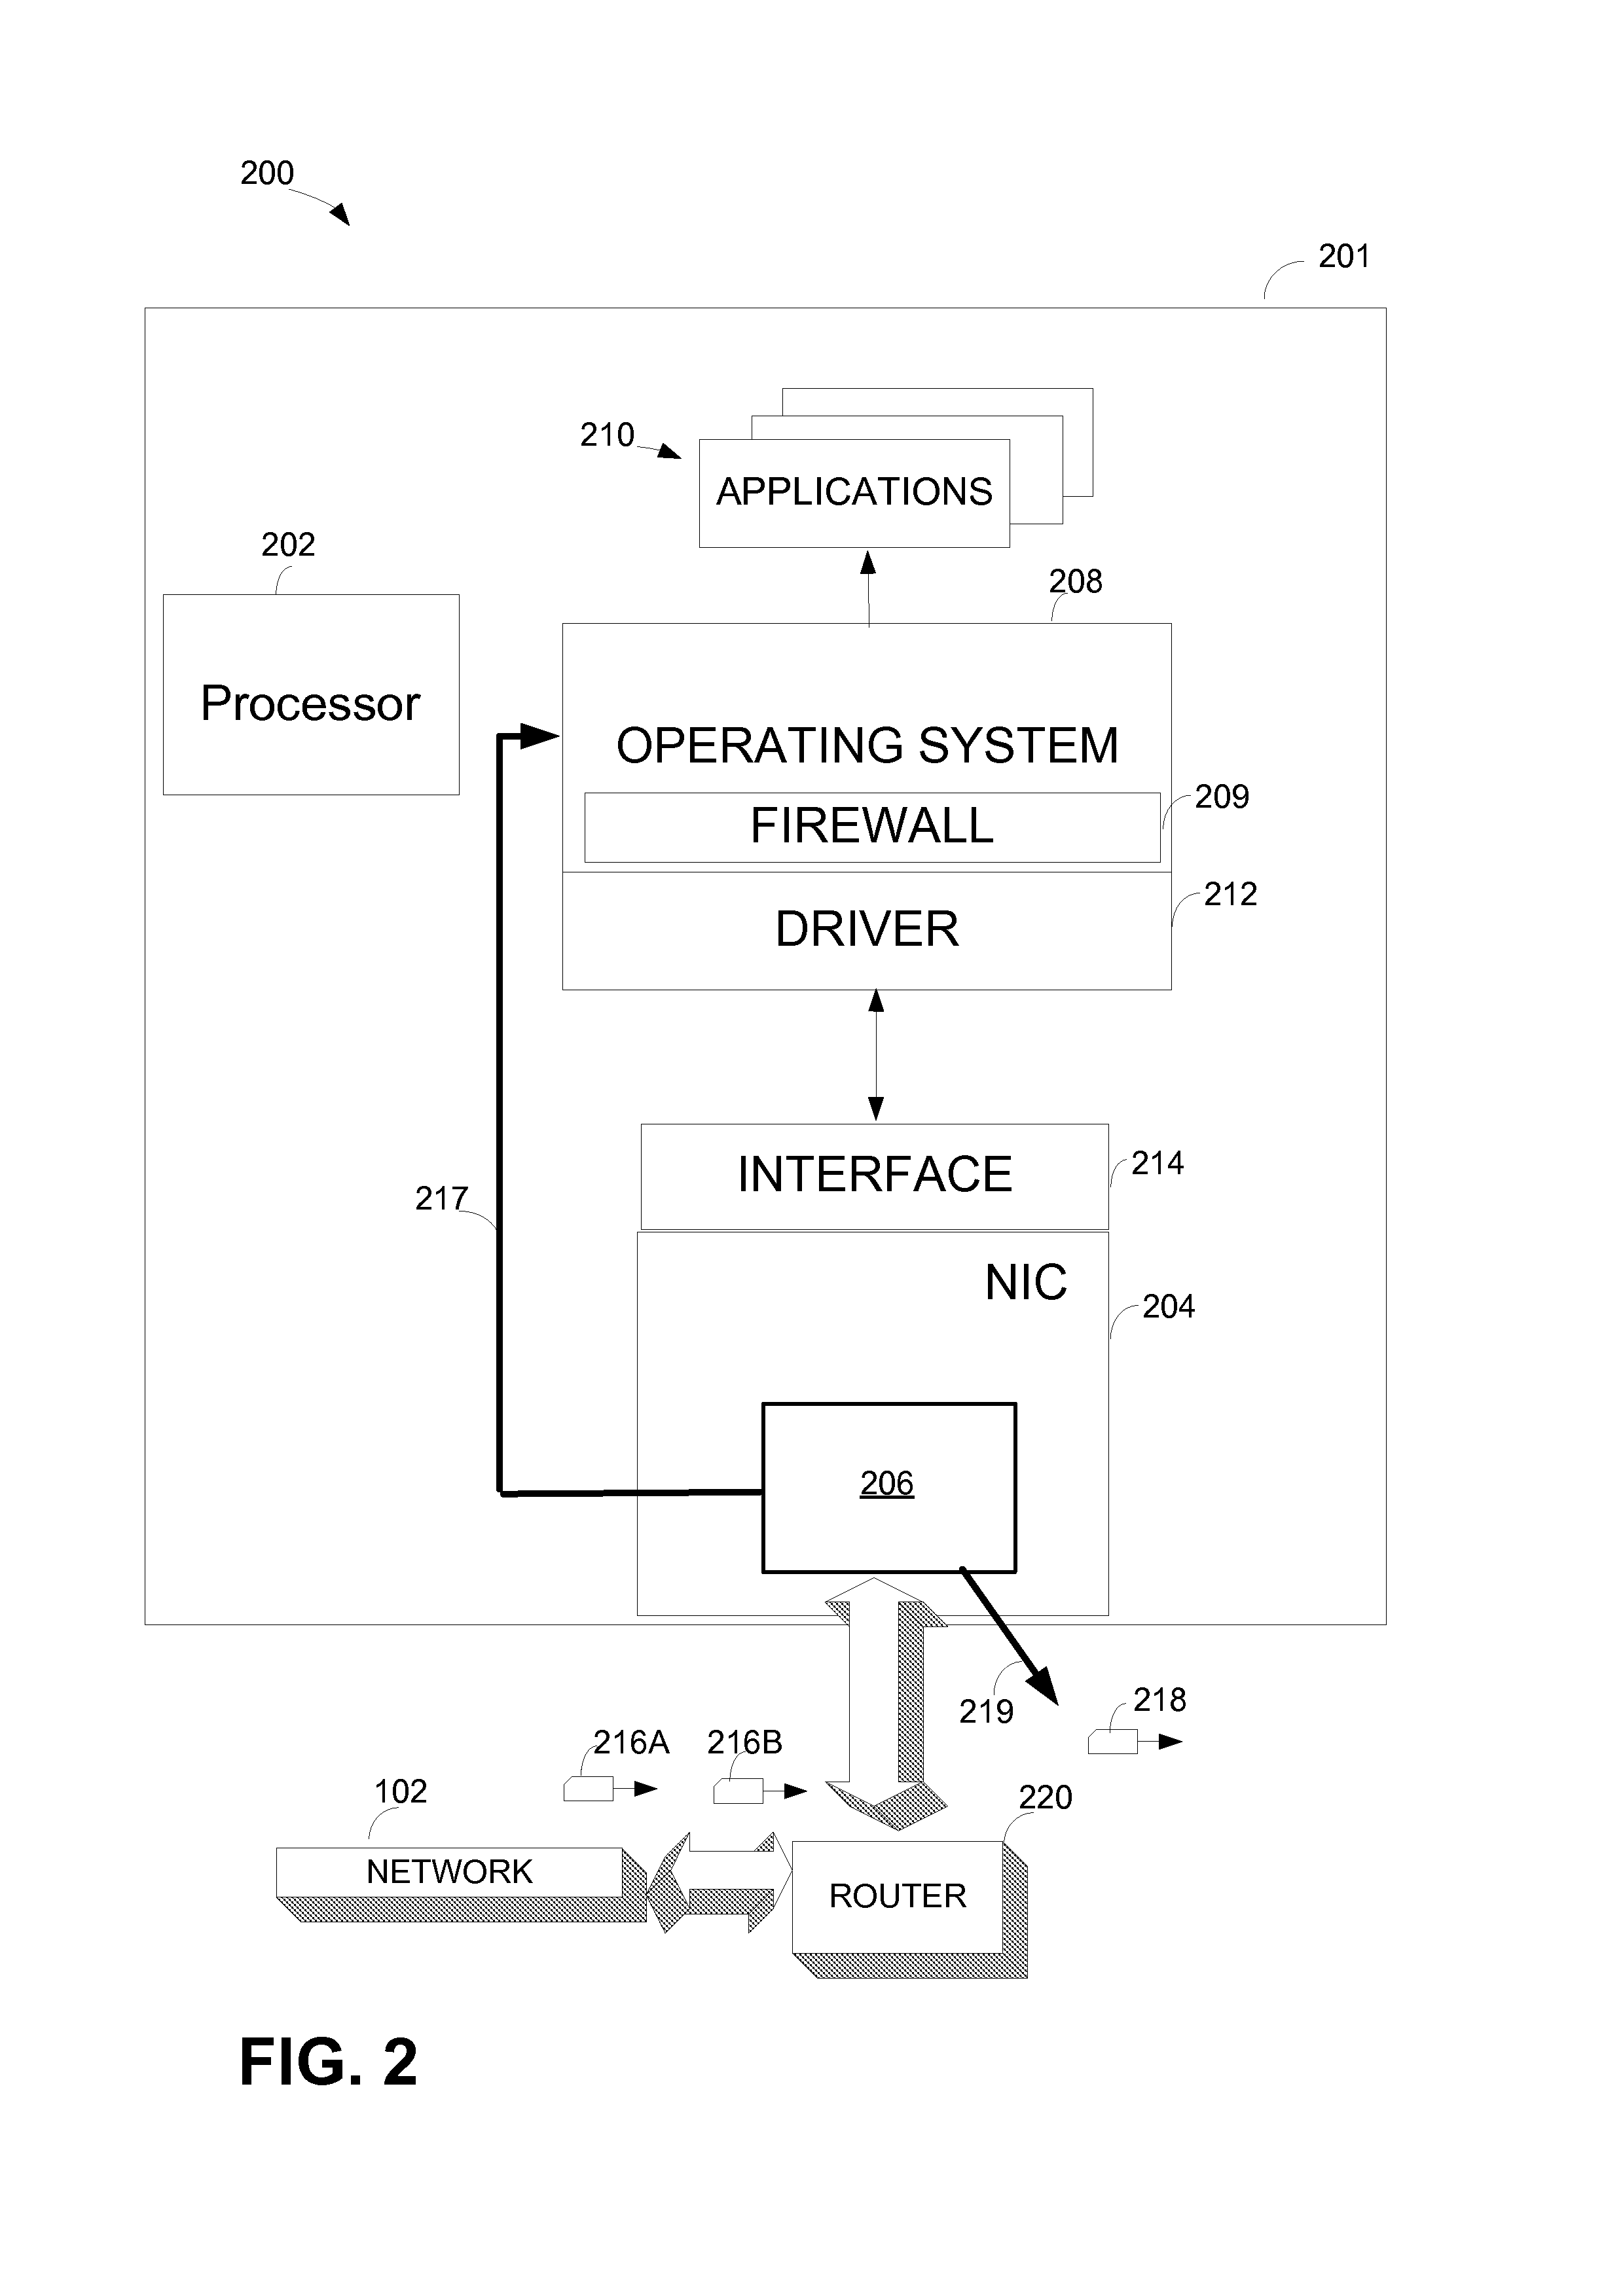 Mechanism to save system power using packet filtering by network interface